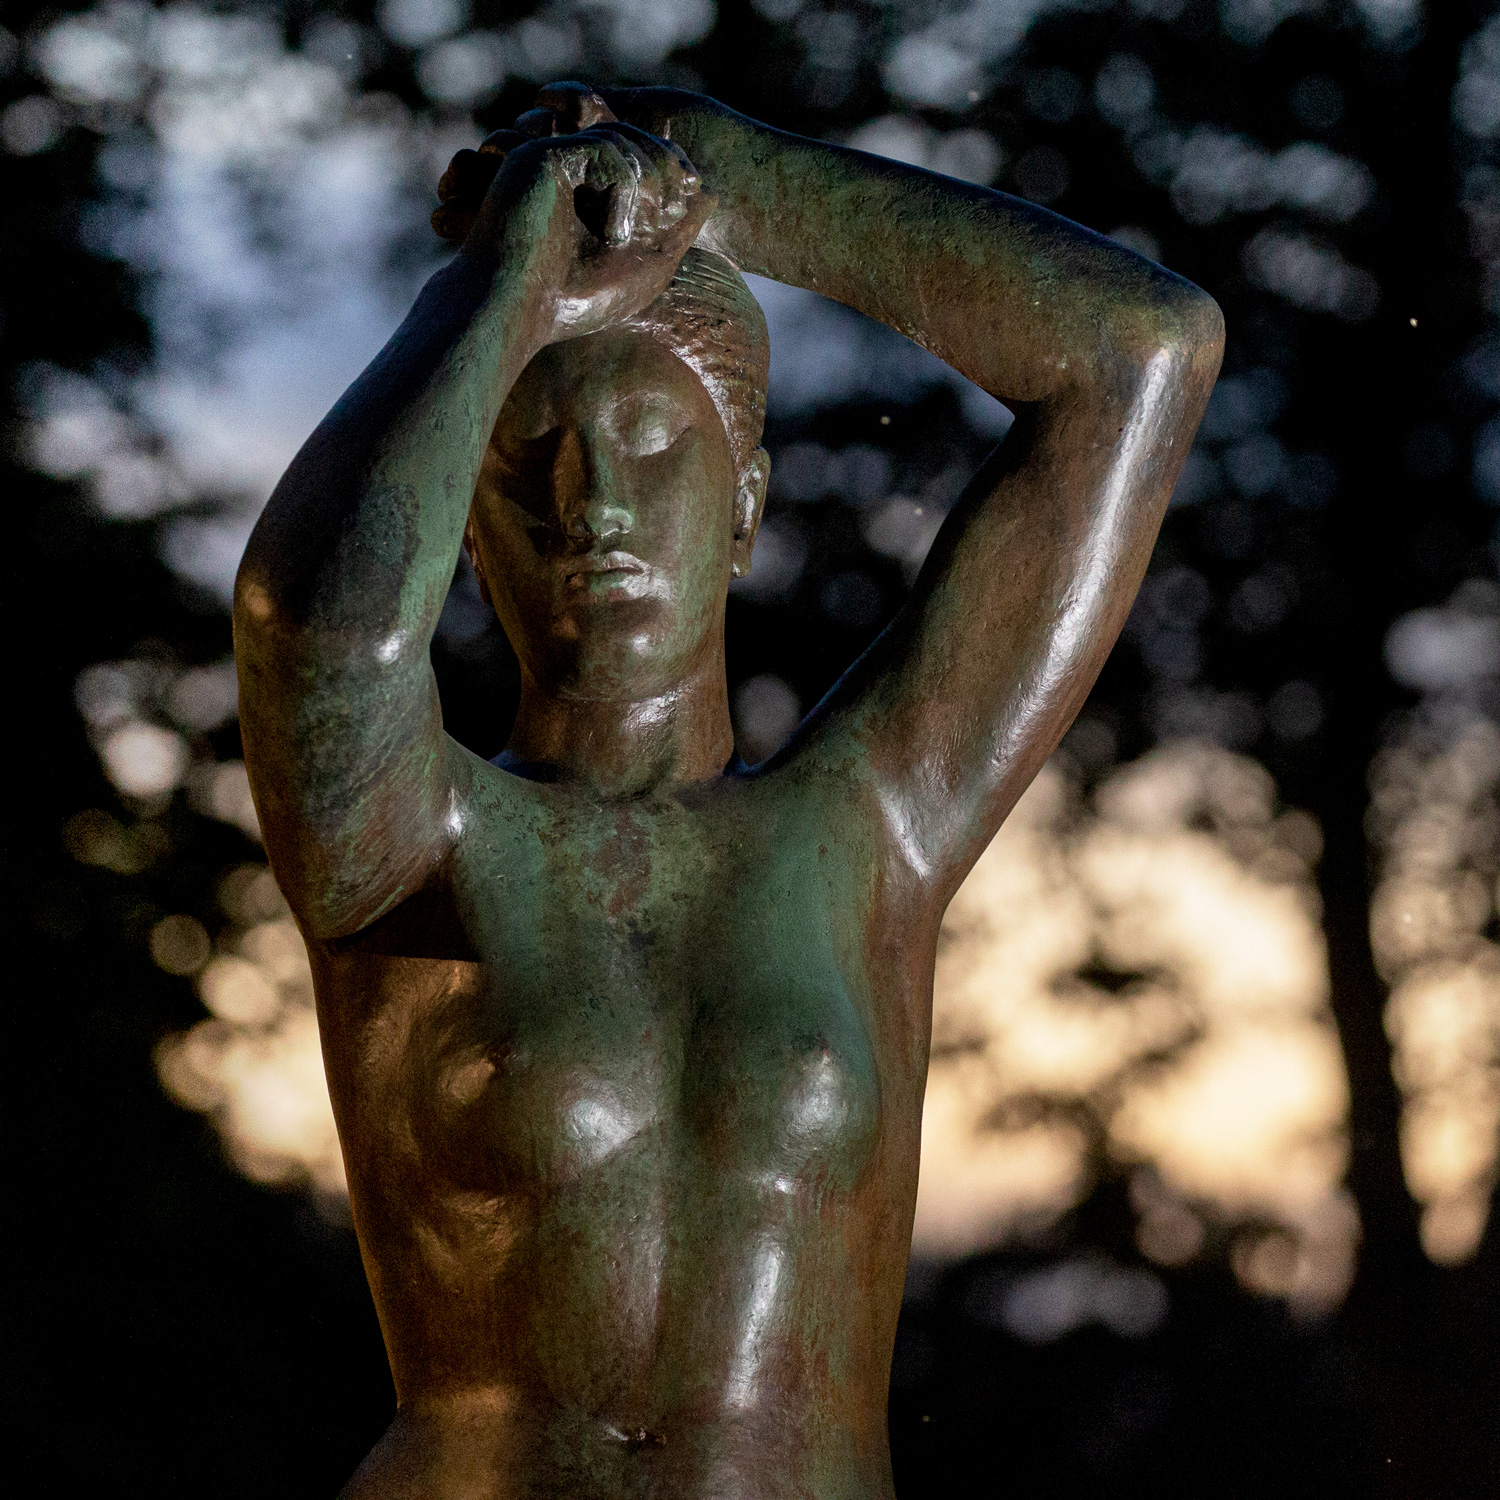 A nighttime view of a bronze nude female figure with her arms stretched over her head